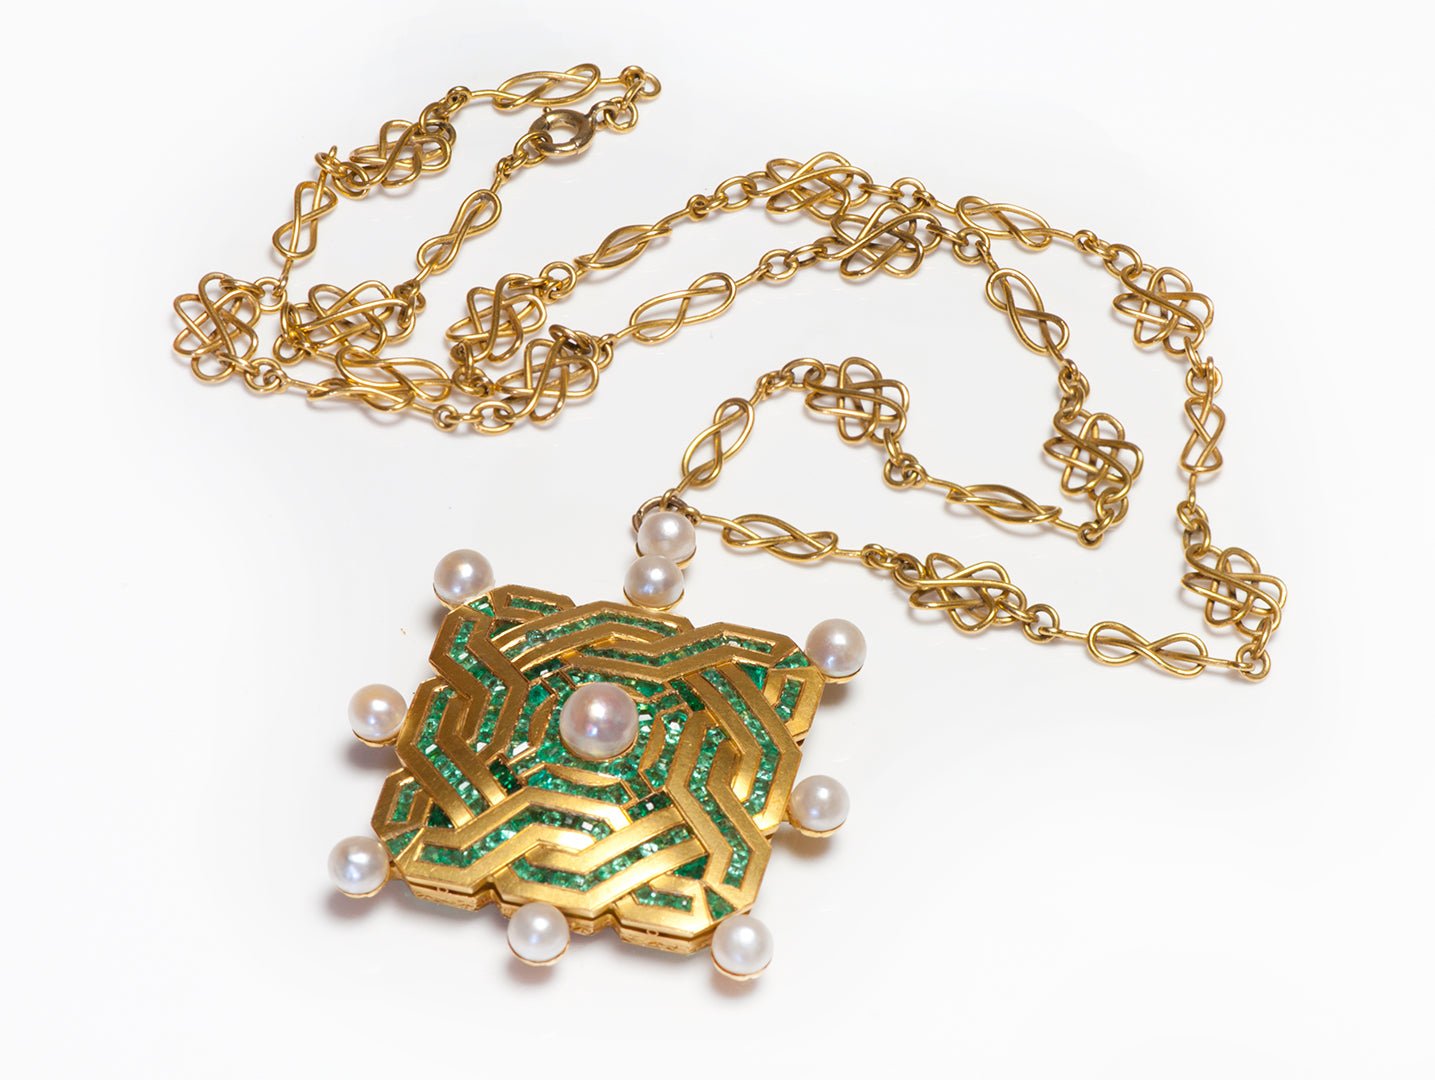 Antique Gold Emerald Pearl Juvenia Watch Pendant and Chain